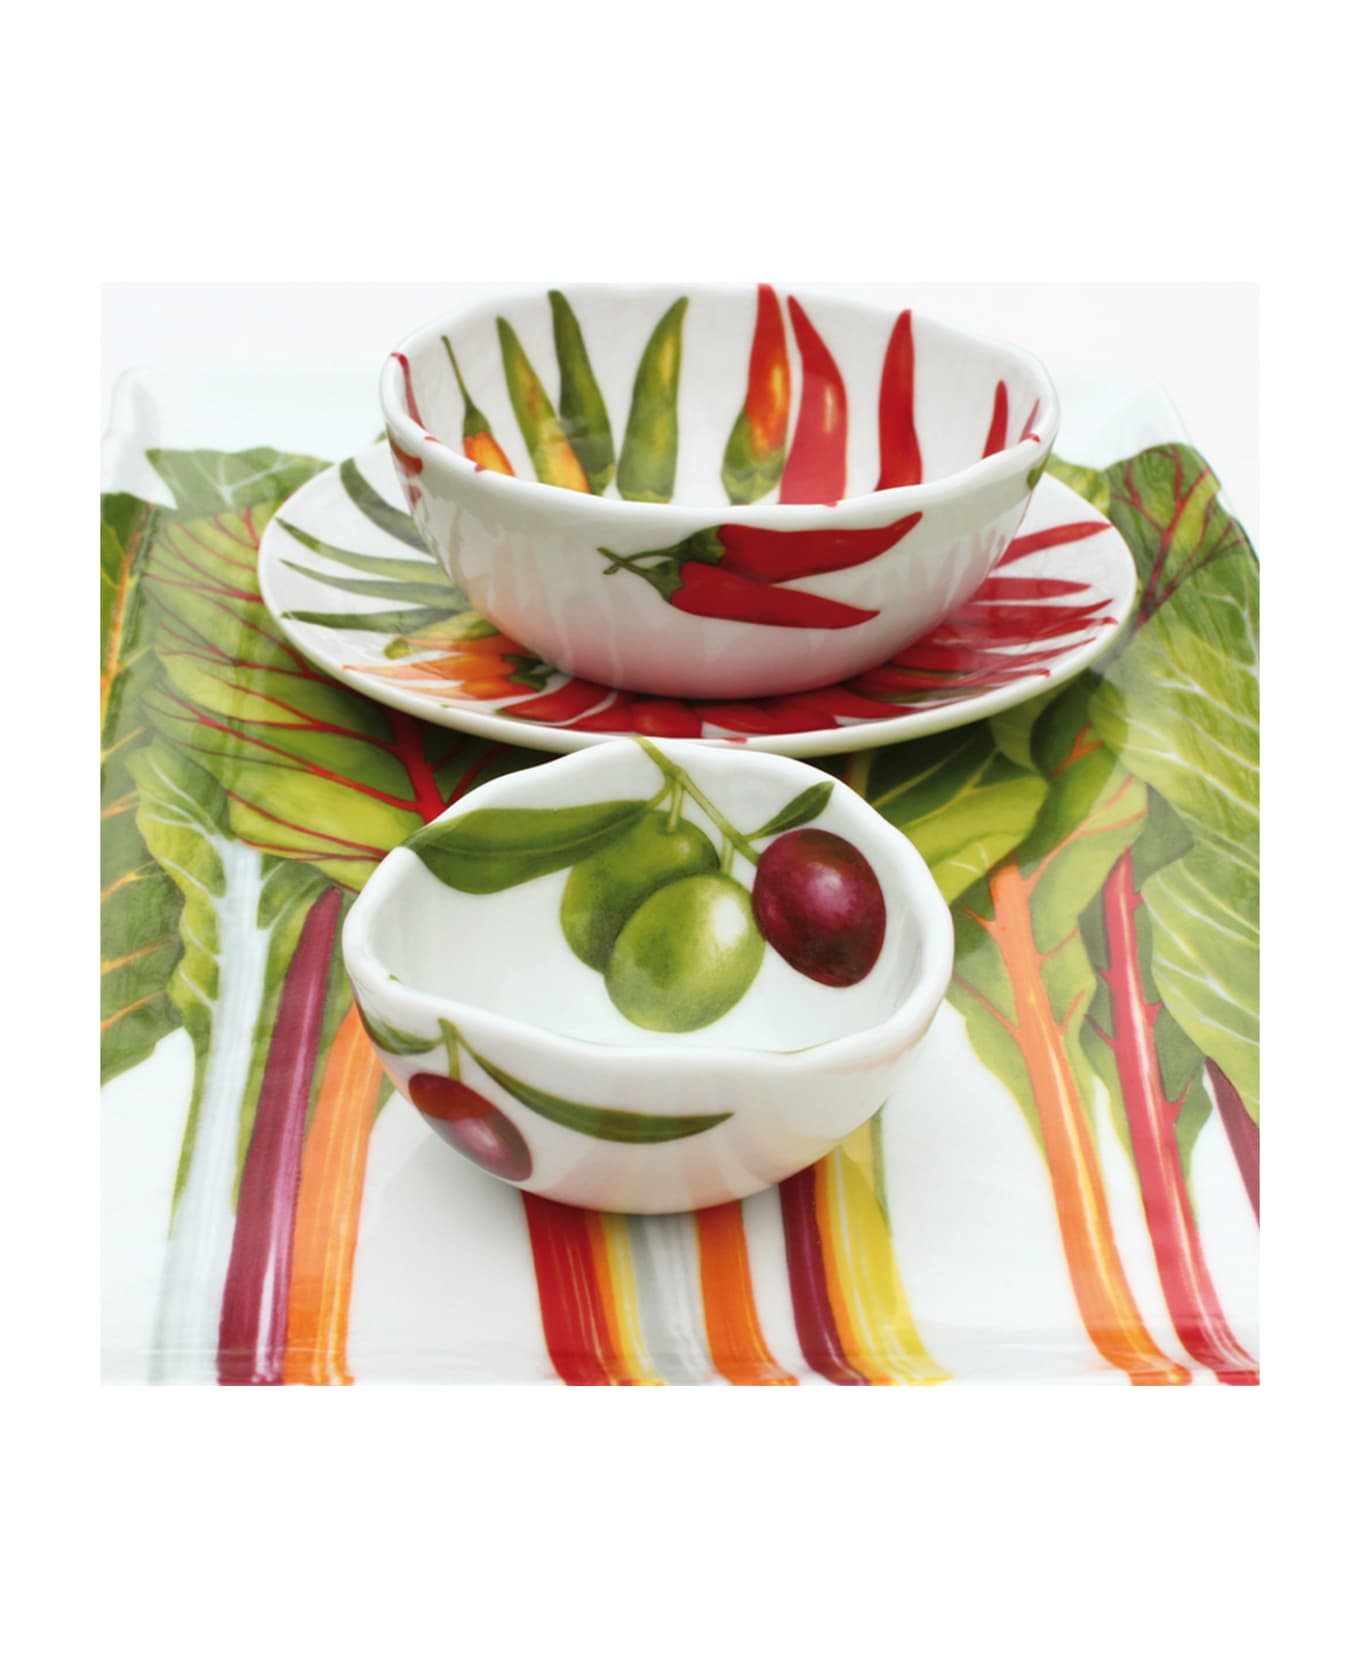 Taitù Set of 4 Small Bowls PEPERONCINI - Dieta Mediterranea Vegetables Collection - Red お皿＆ボウル